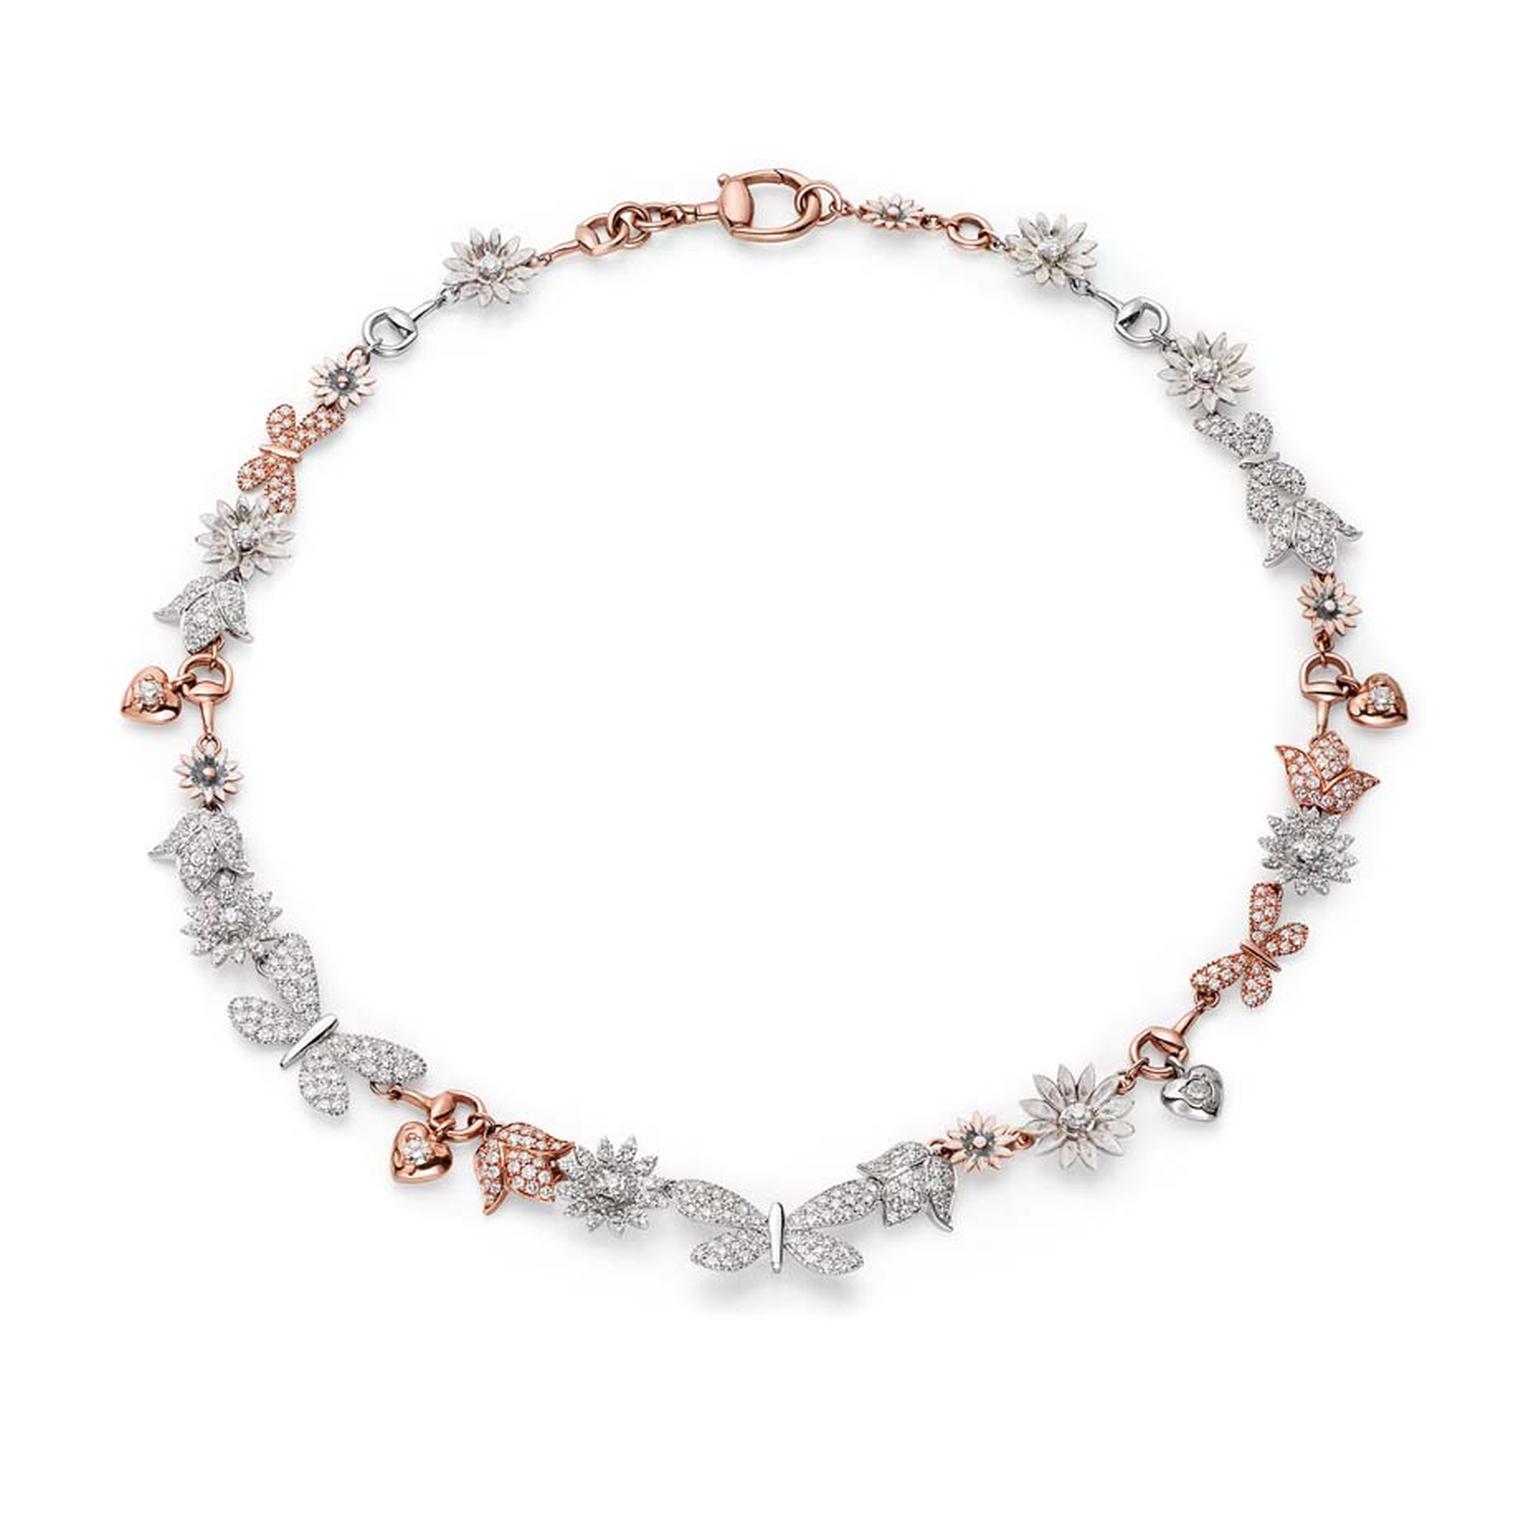 Limited-edition Gucci necklace from the new Flora collection, set with 512ct of diamonds shaped into flowers, butterflies and hearts on white and rose gold.